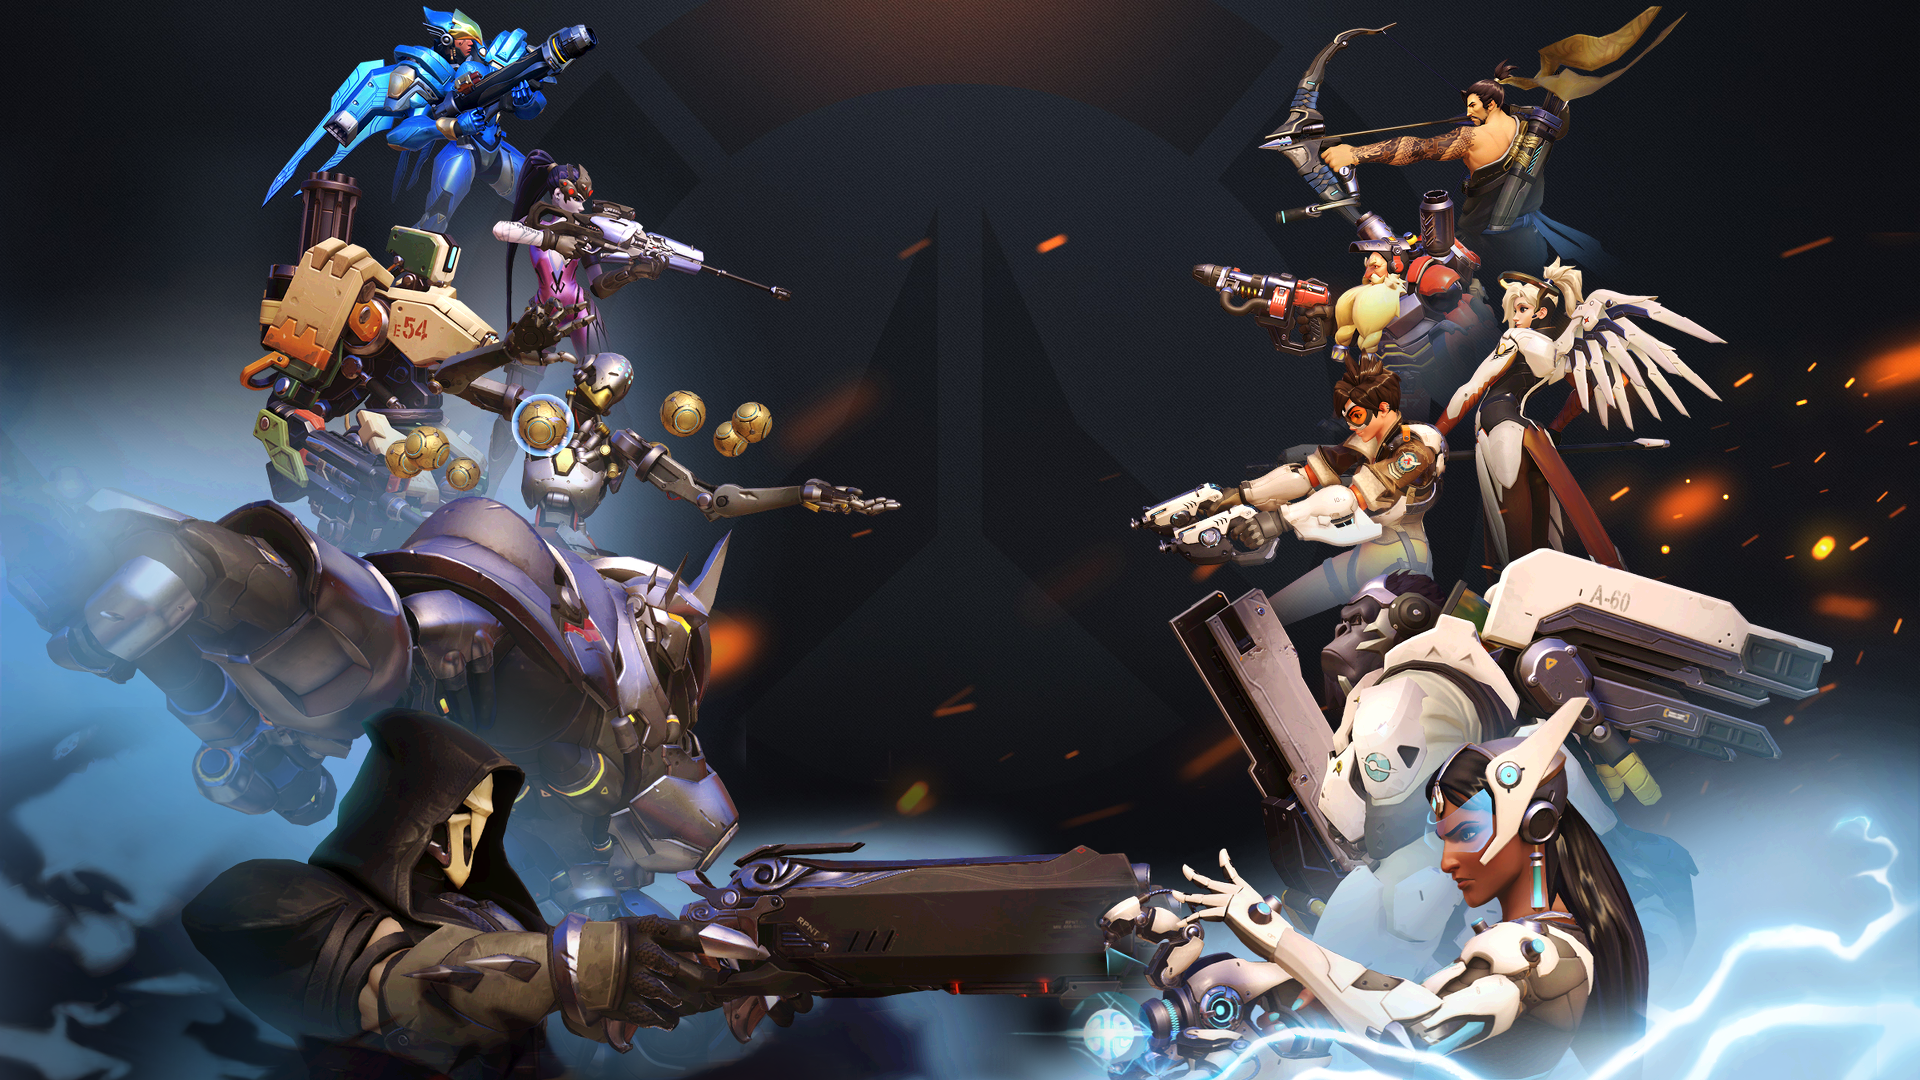 General 1920x1080 Blizzard Entertainment Overwatch Tracer (Overwatch) Zenyatta (Overwatch) Pharah (Overwatch) Widowmaker (Overwatch) Bastion (Overwatch) Reinhardt Wilhelm Reinhardt (Overwatch) Symmetra (Overwatch) Mercy (Overwatch) Winston (Overwatch) Torbjörn (Overwatch) Hanzo (Overwatch) video game characters PC gaming